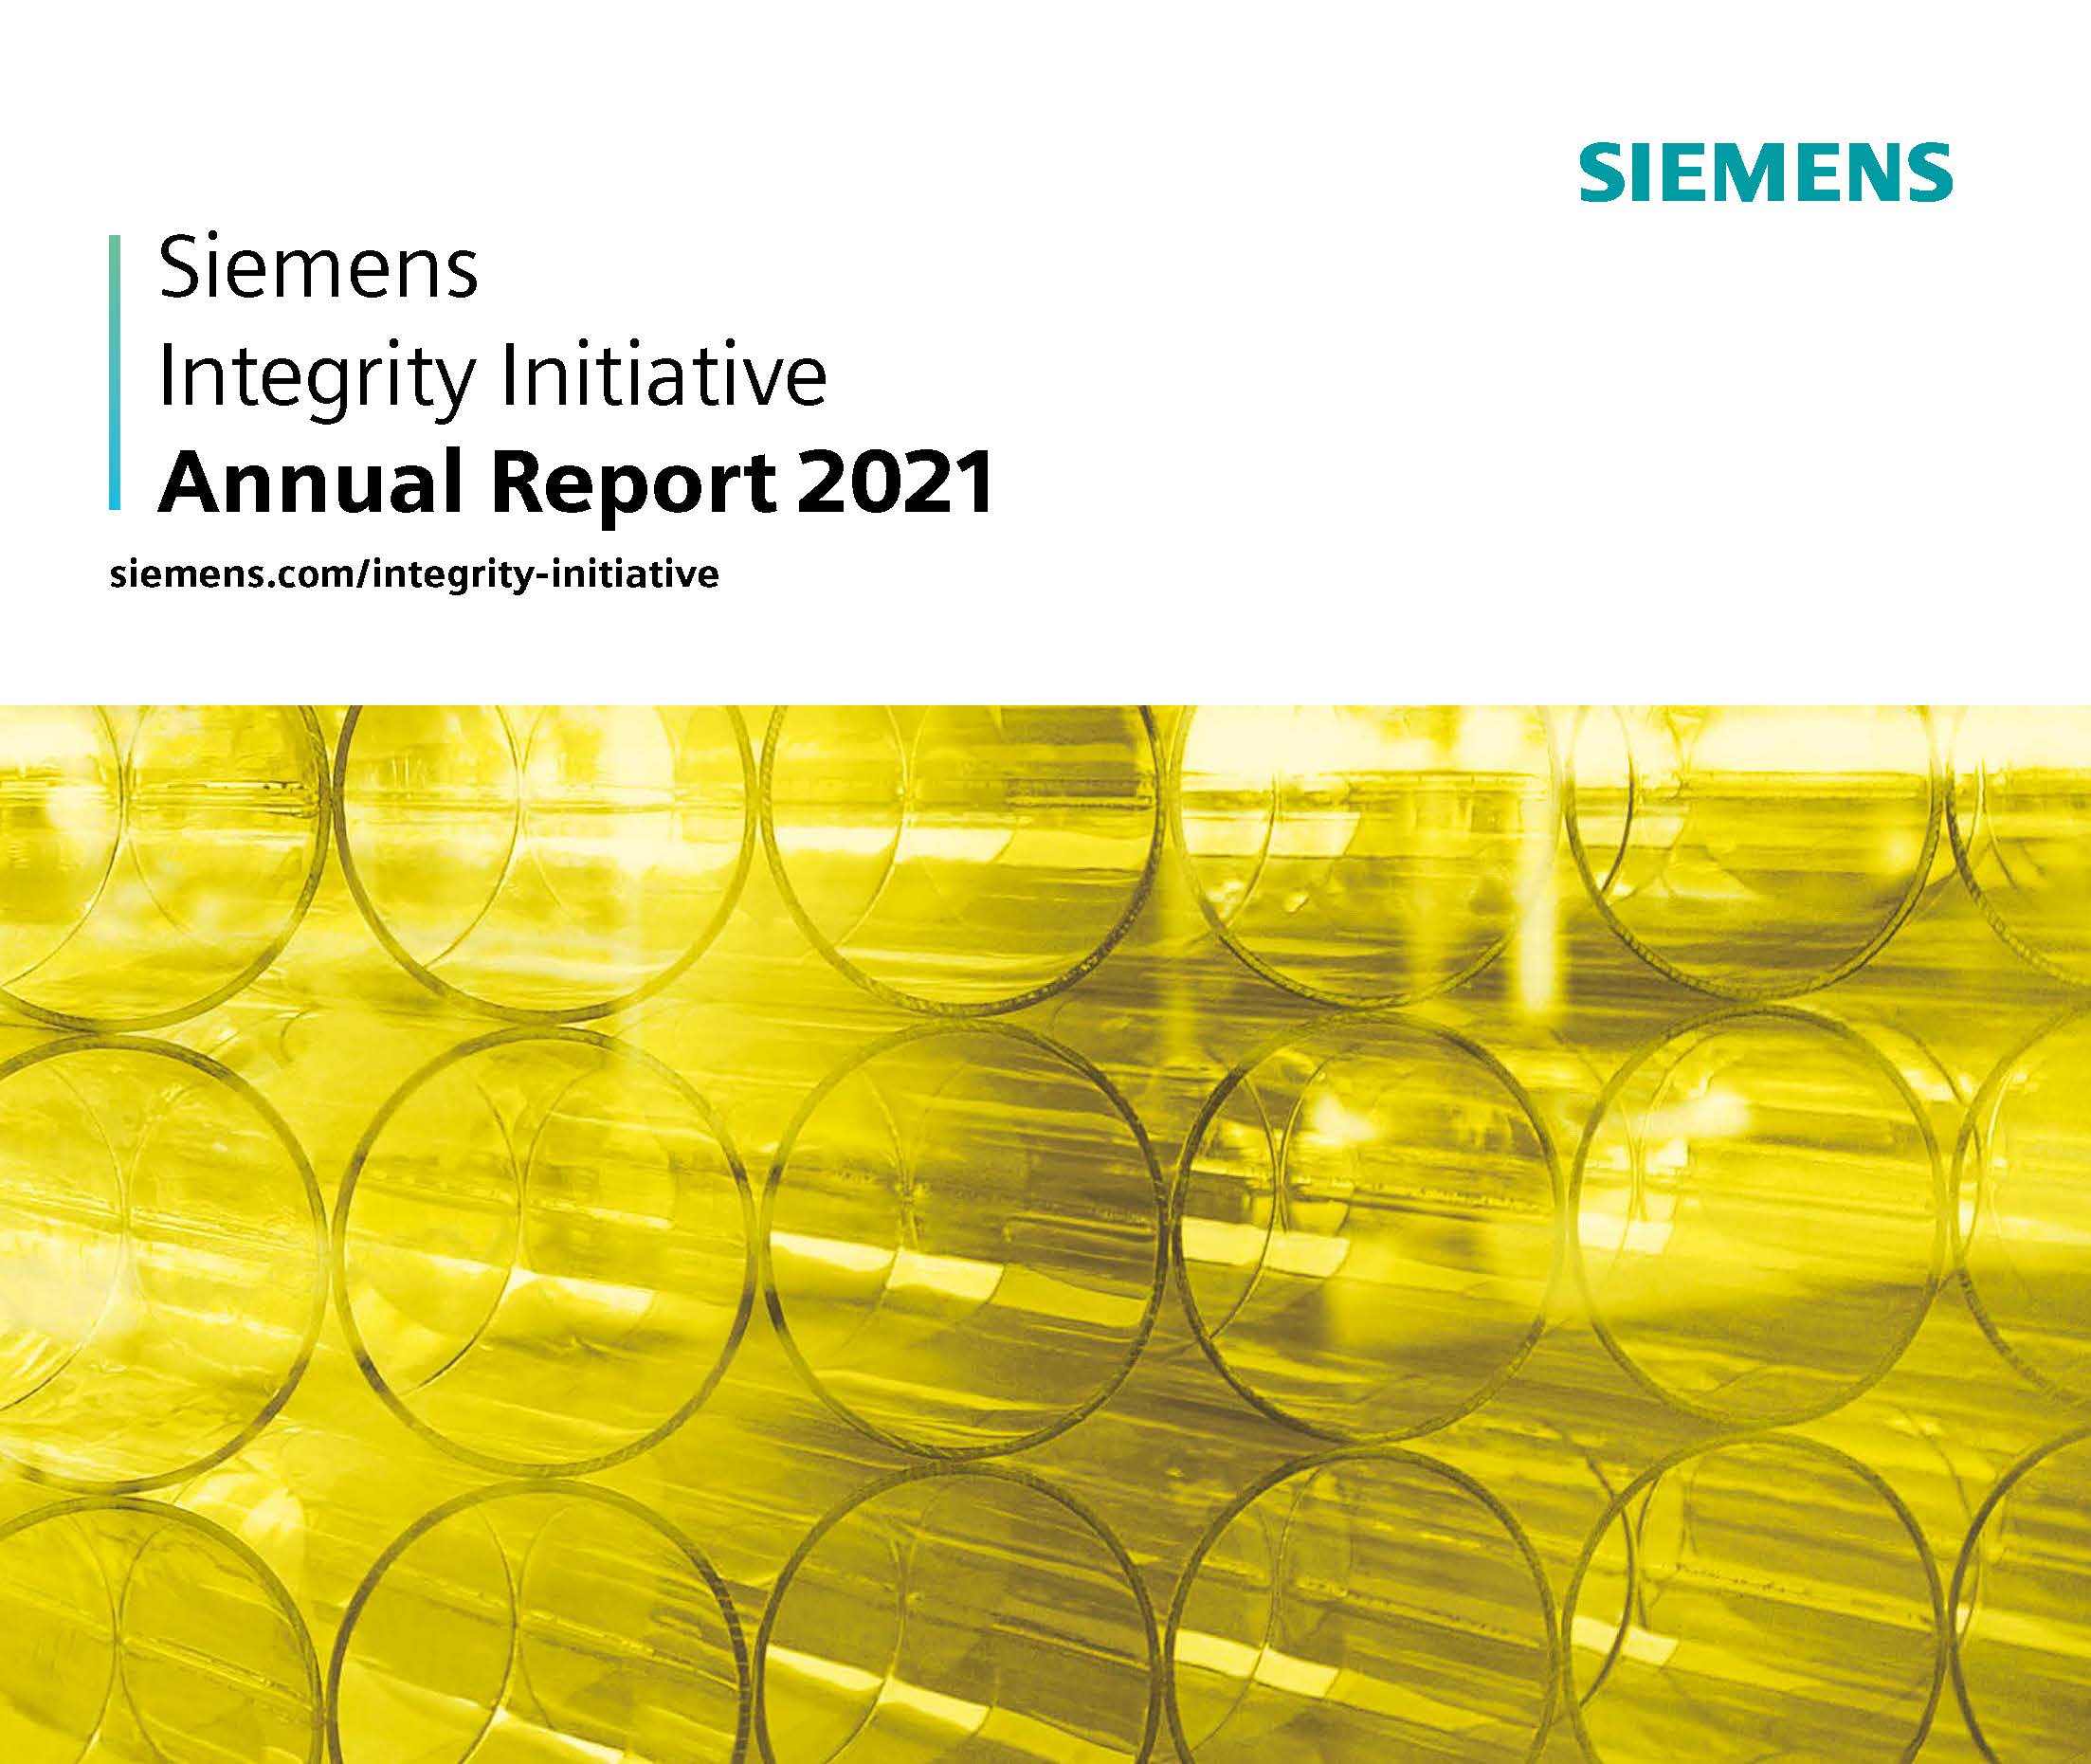 Siemens Integrity Initiative Annual Report 2021 Basel Institute on